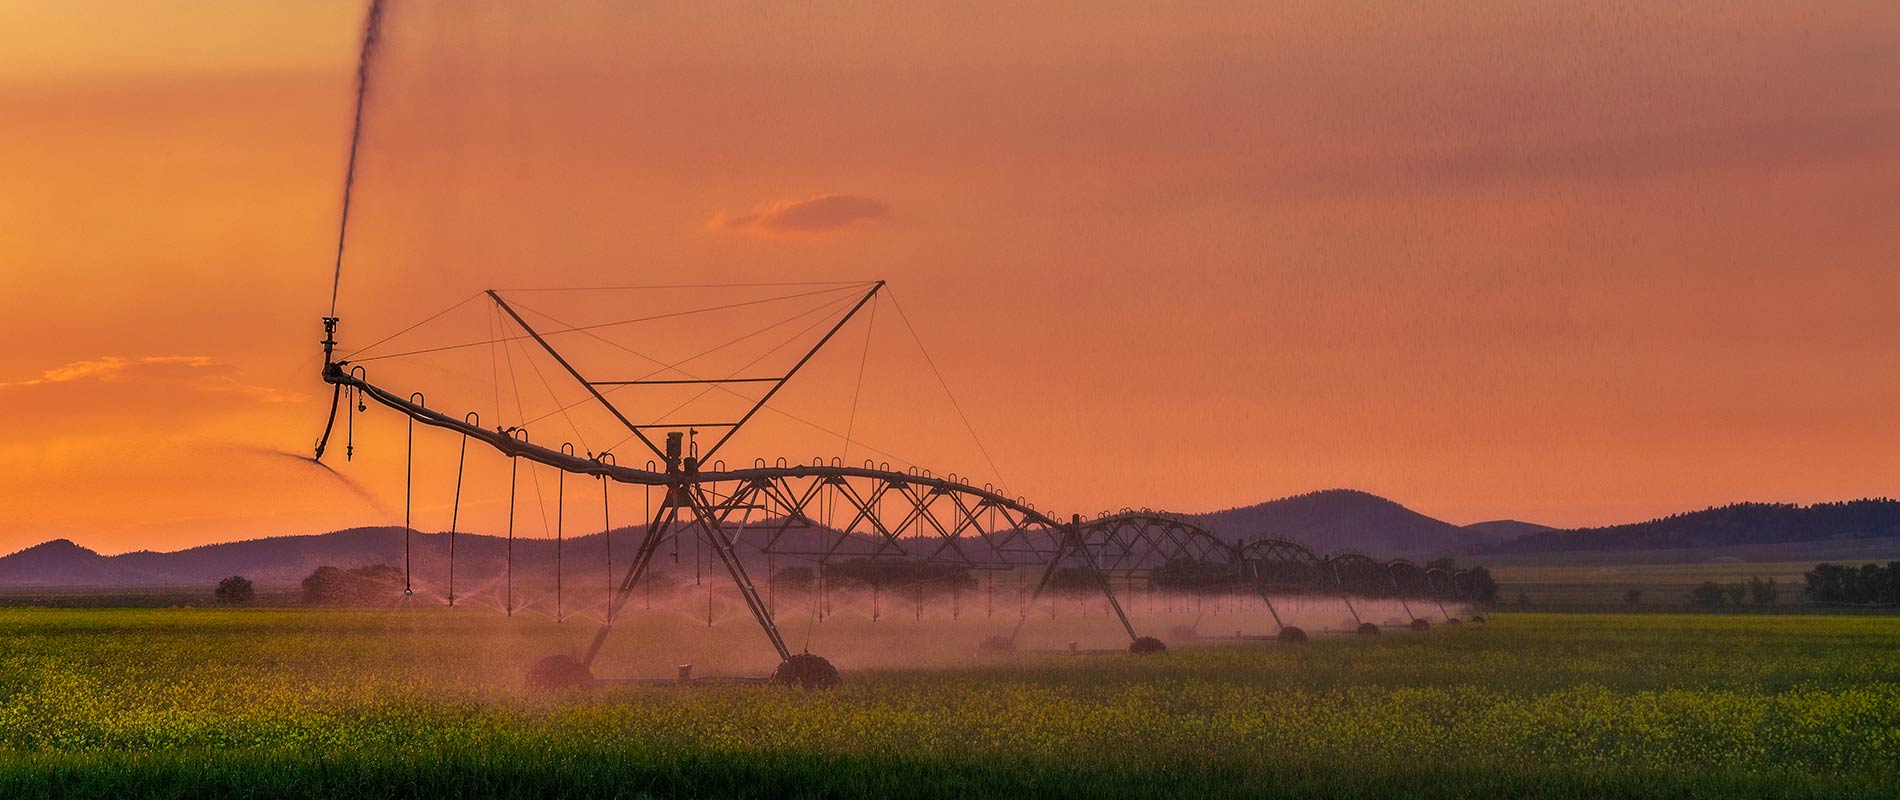 Montana field being watered